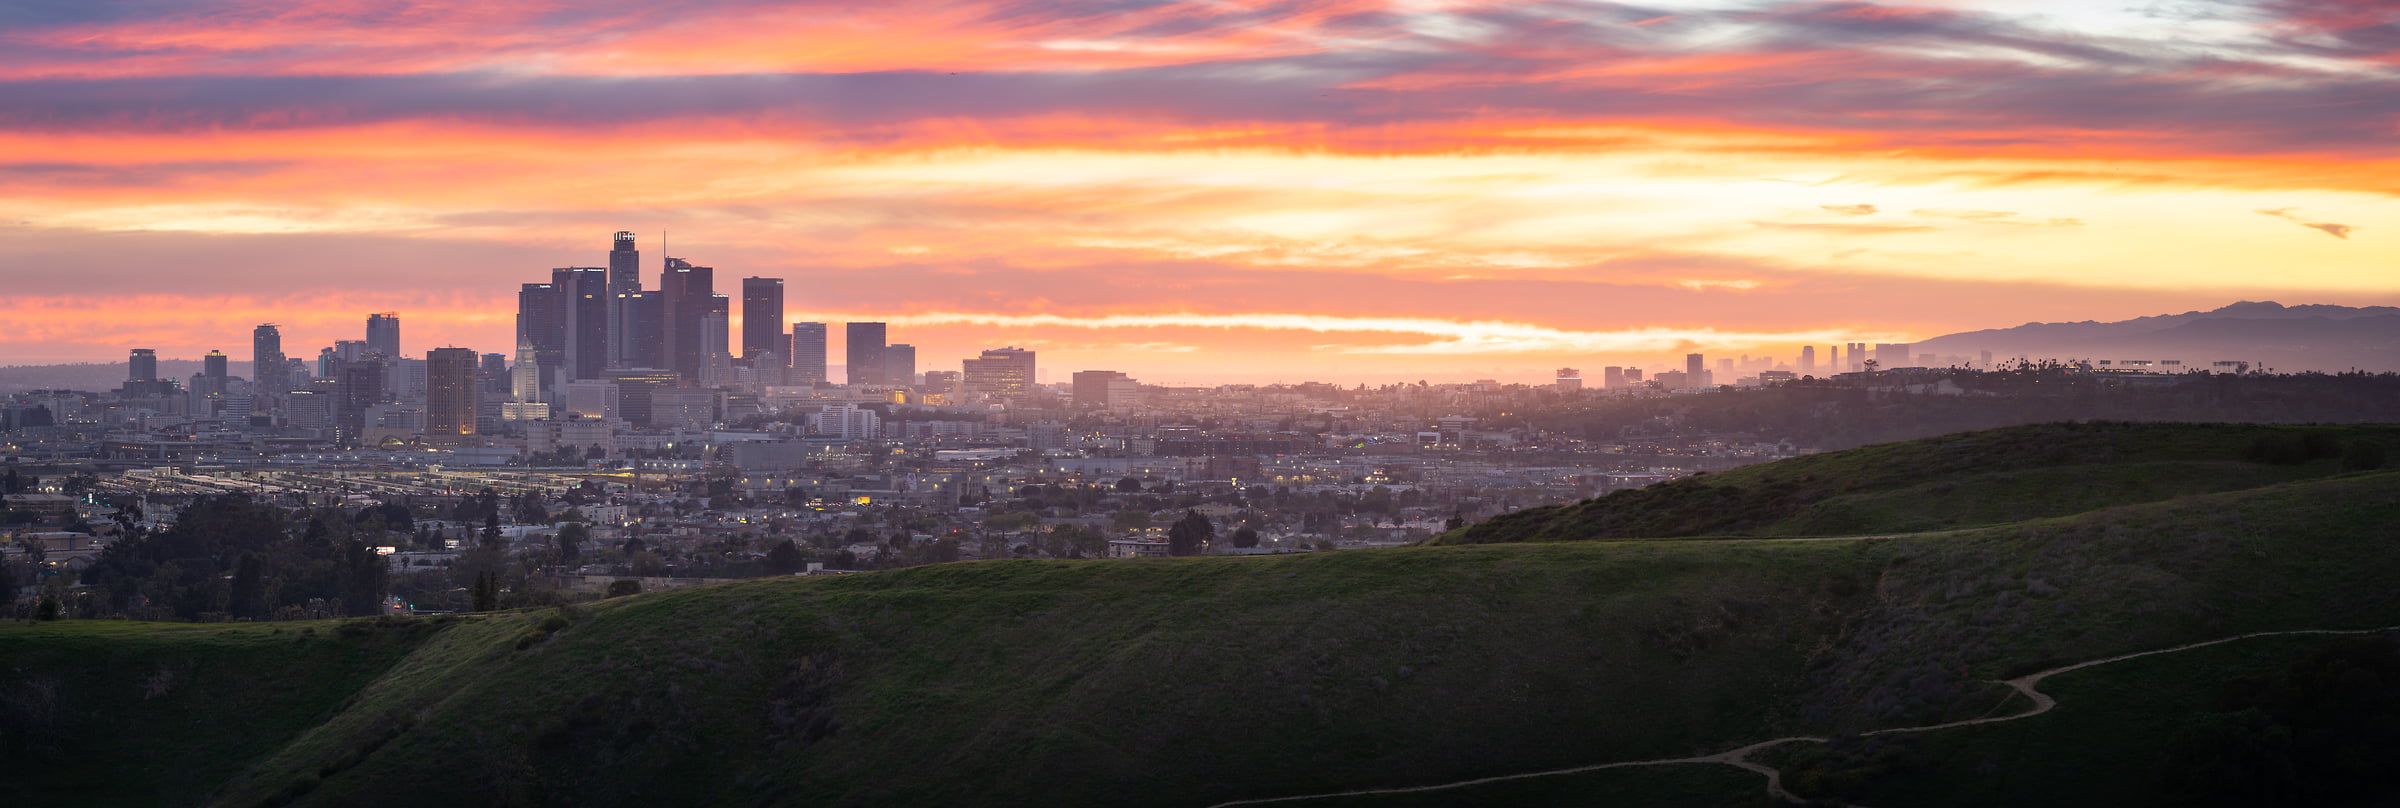 349 megapixels! A very high resolution, large-format panorama photo of the Los Angeles skyline at sunset; cityscape photograph created by Jeff Lewis in Los Angeles, California.